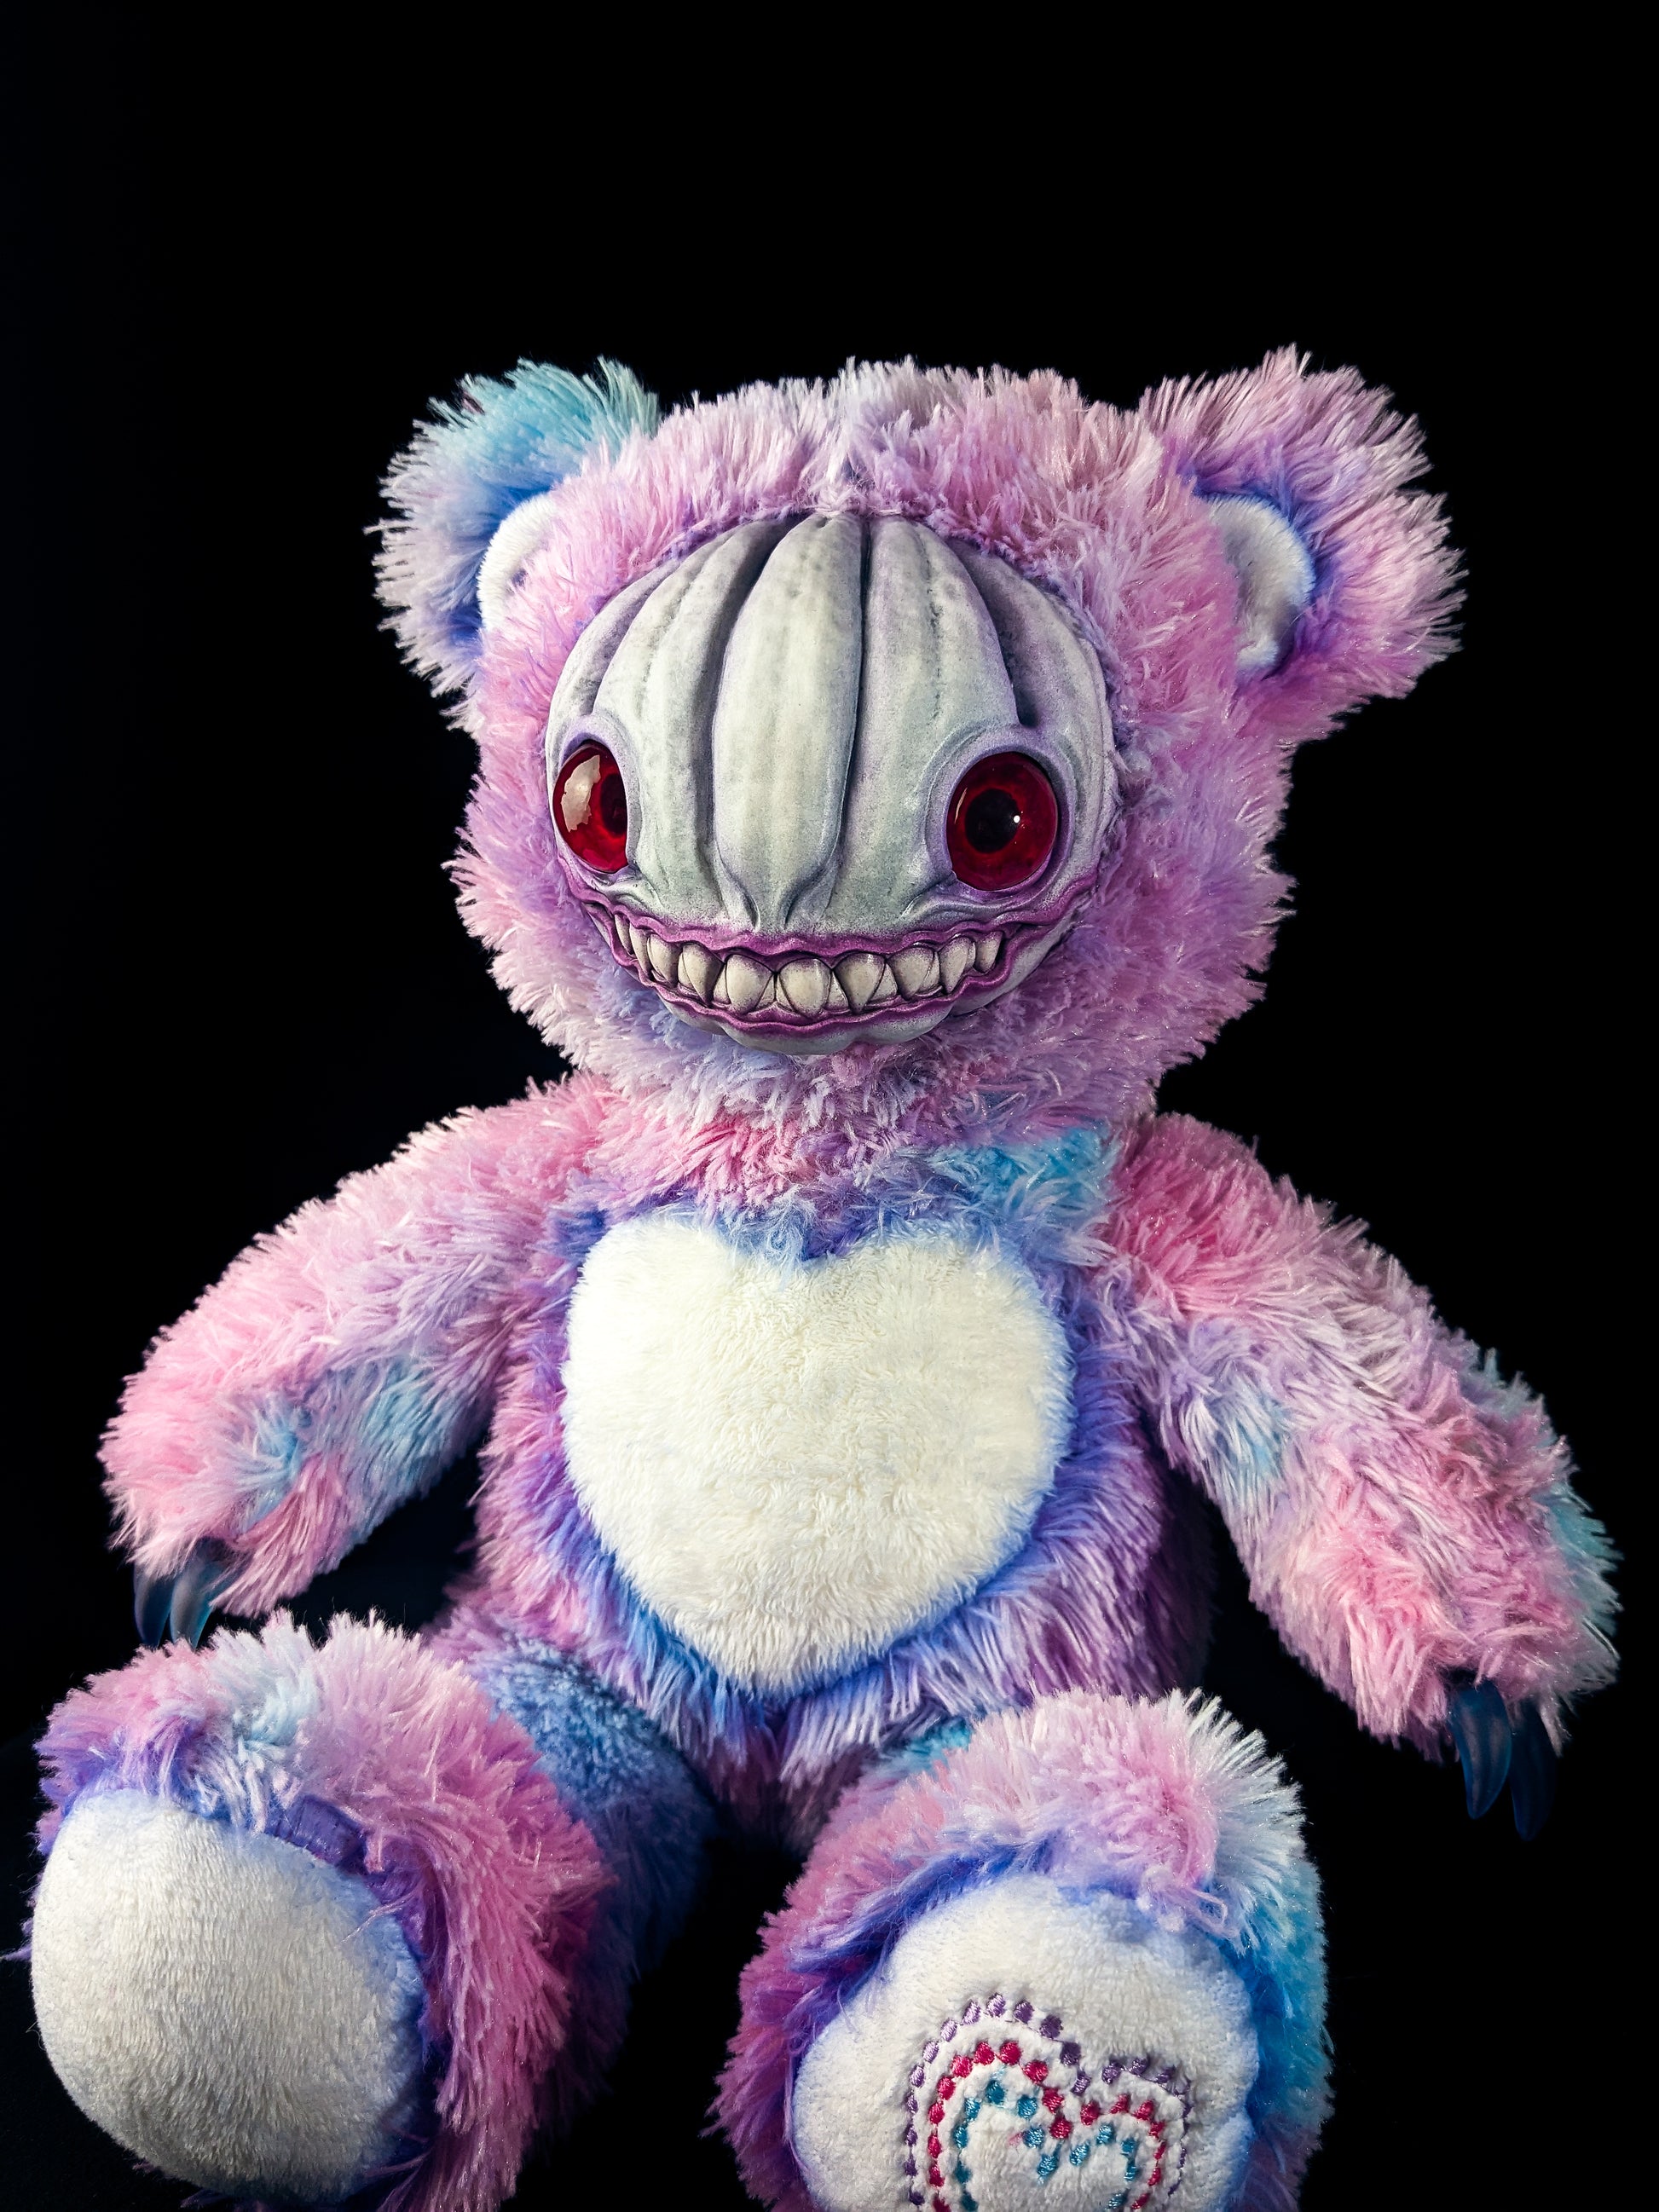 Cosmic Rot: HAUNTVESTER - CRYPTCRITZ Handcrafted Creepy Cute Halloween Pumpkin Art Doll Plush Toy for Spooky Souls